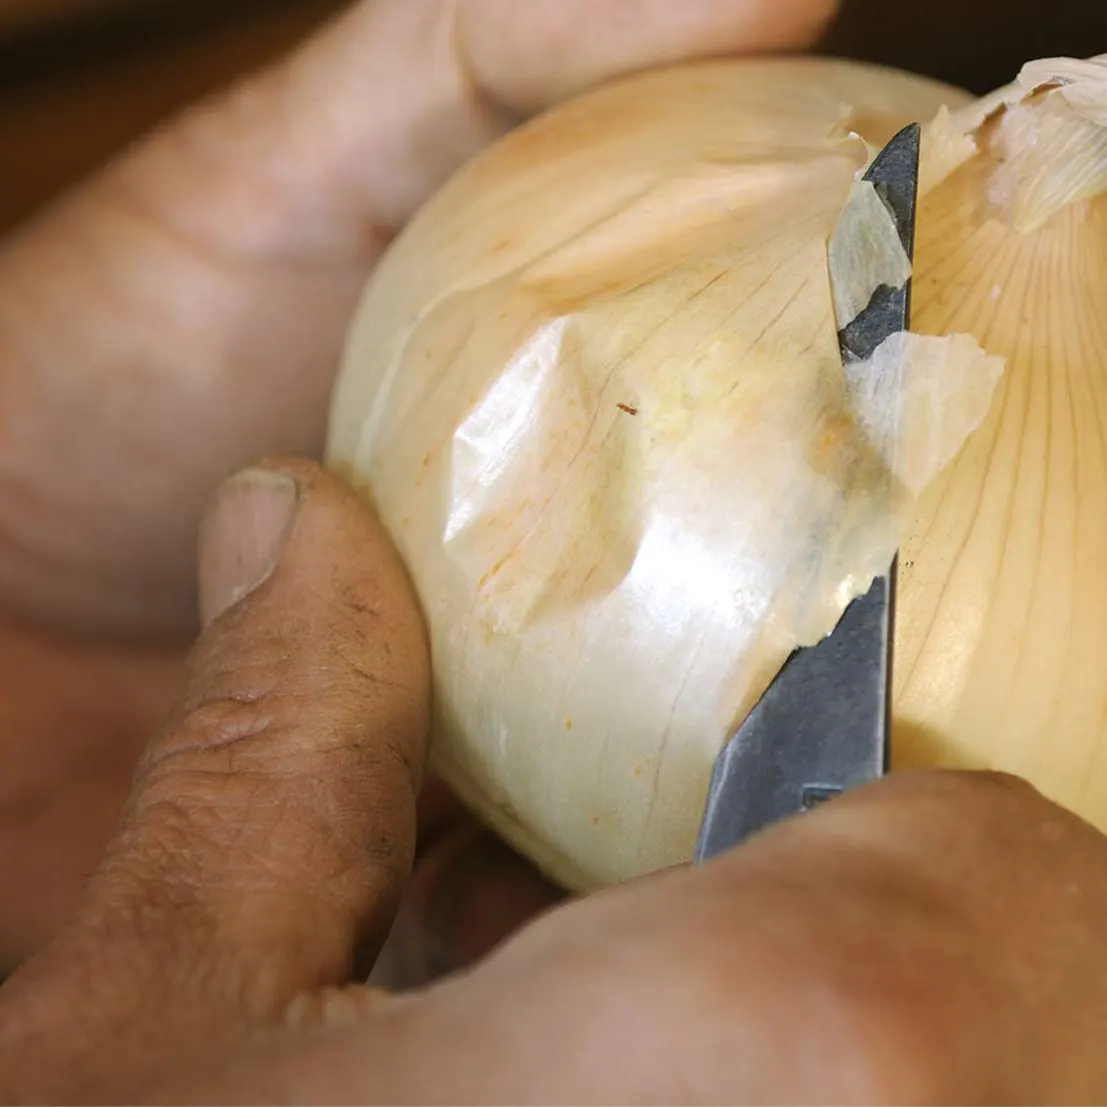 The protected designation of origin for Cevennes' sweet onion